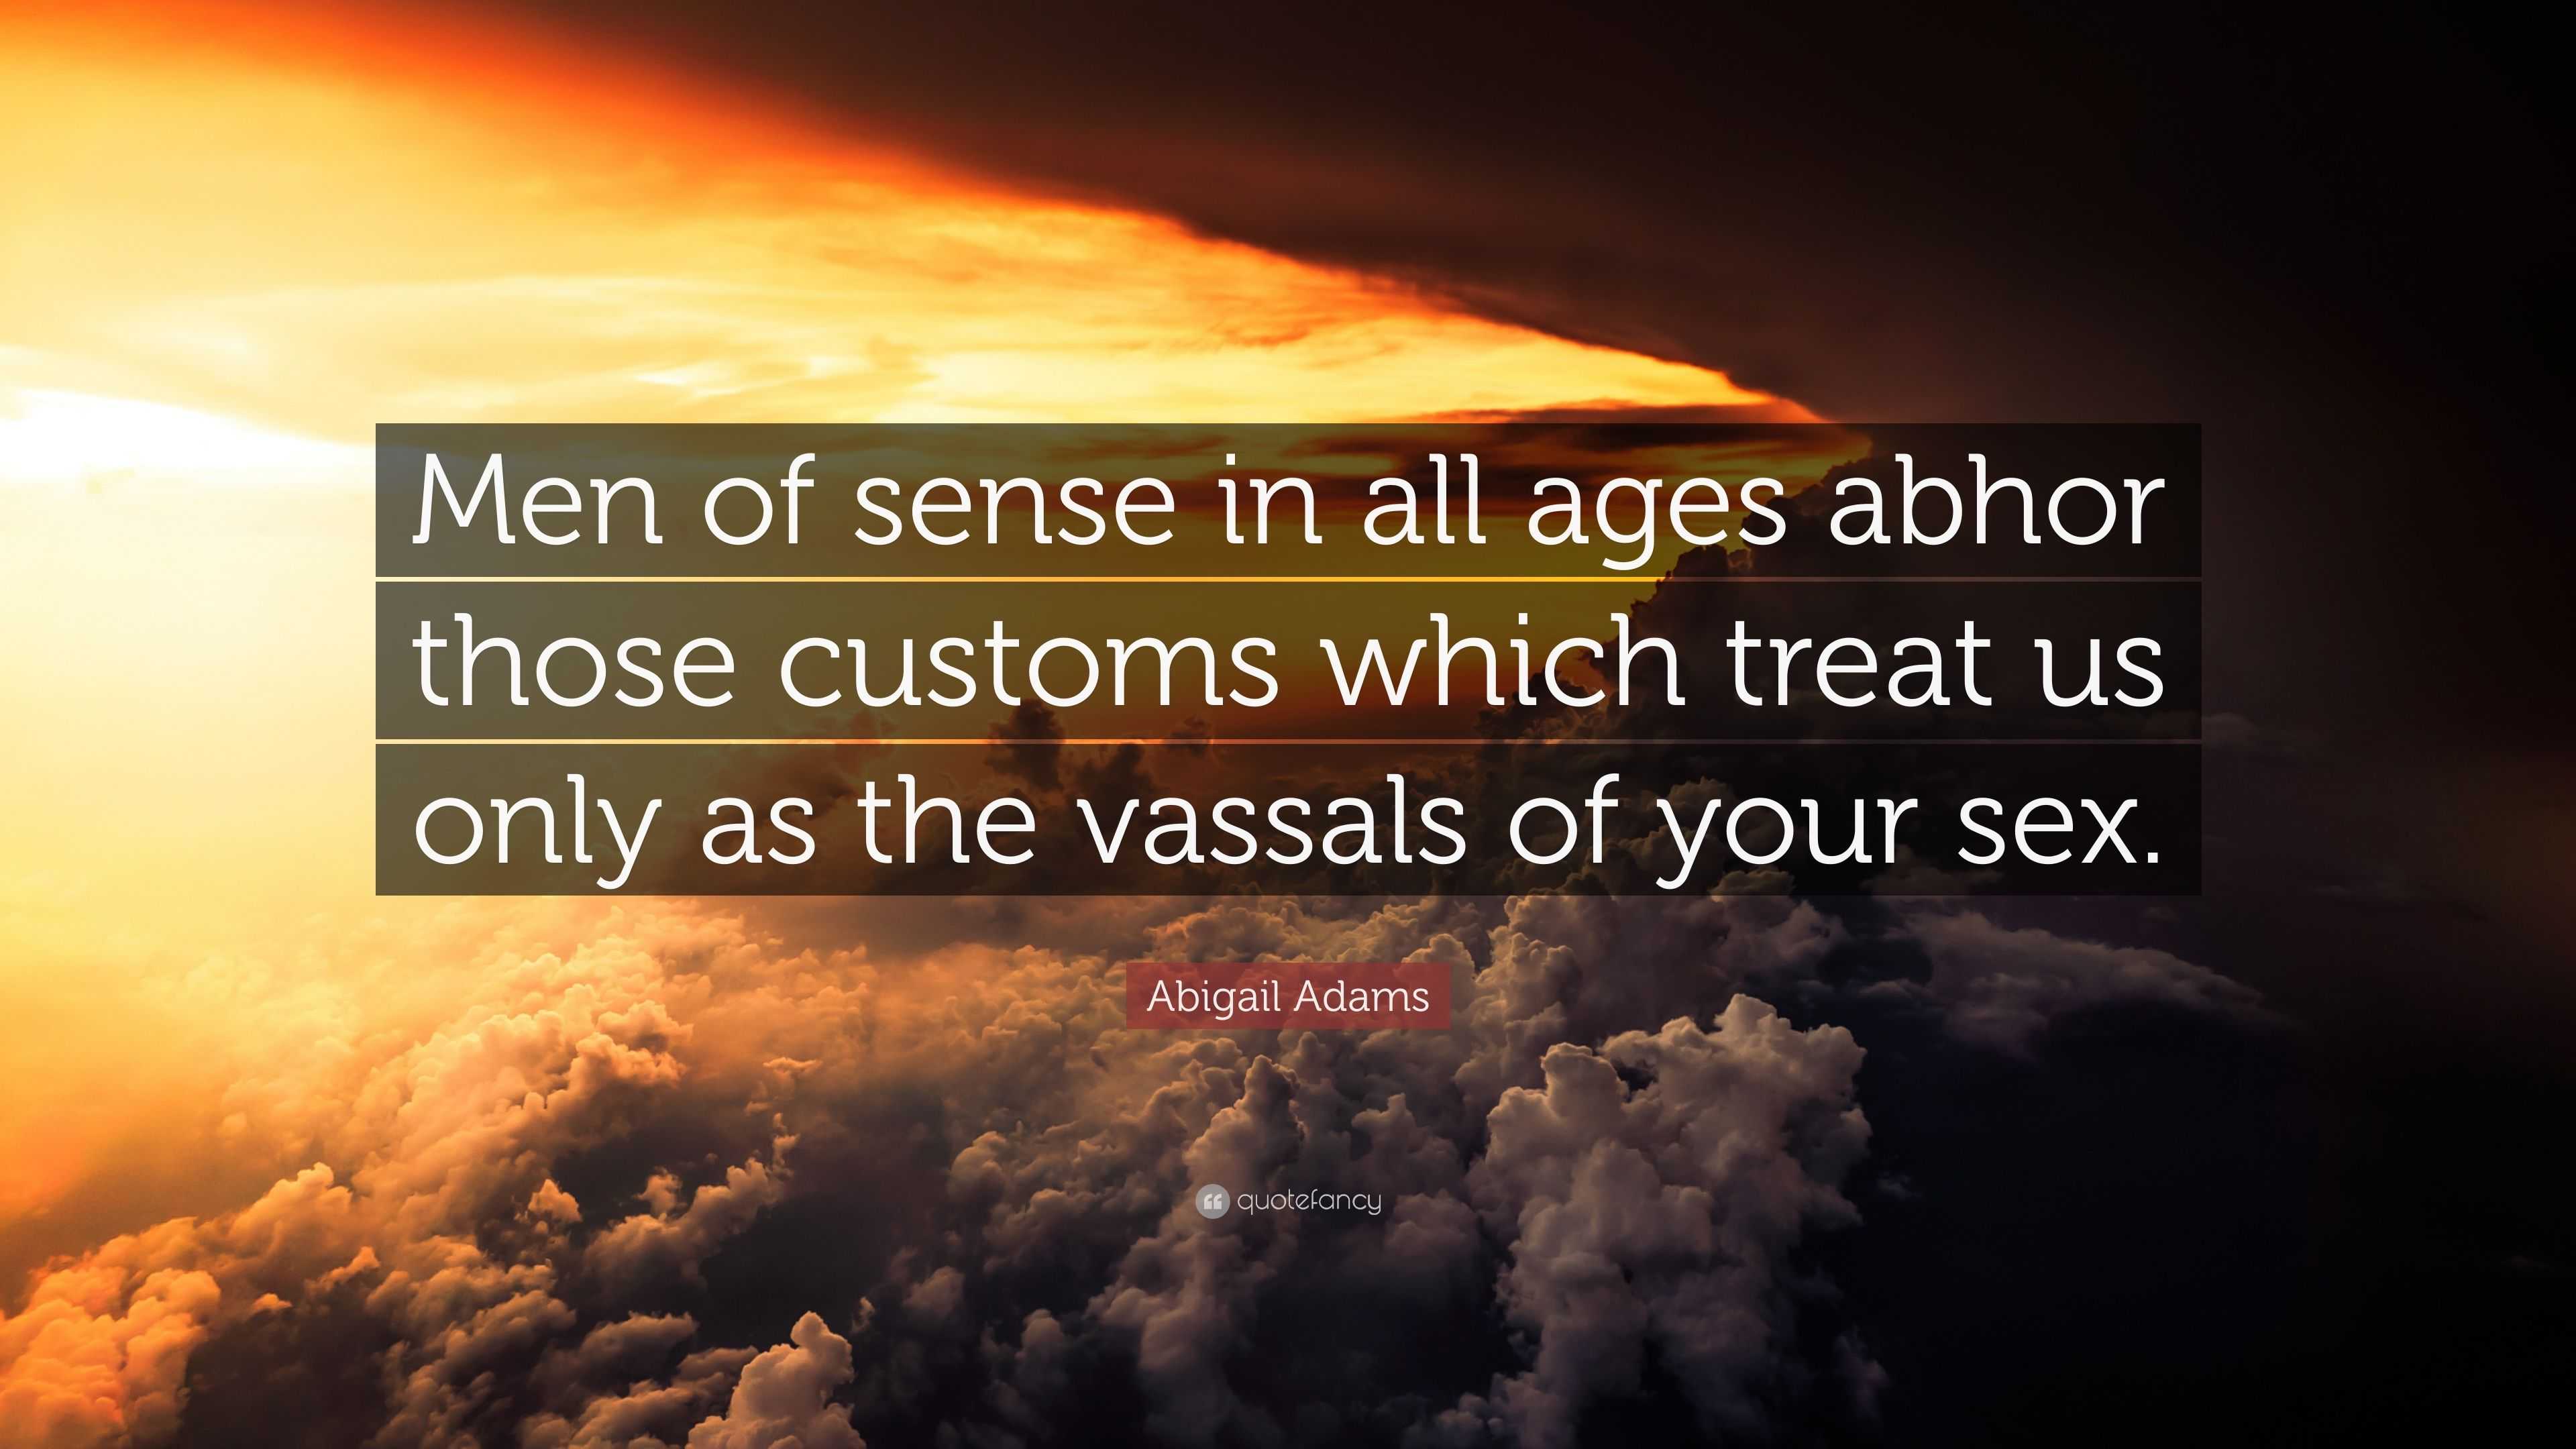 Abigail Adams Quote “men Of Sense In All Ages Abhor Those Customs Which Treat Us Only As The